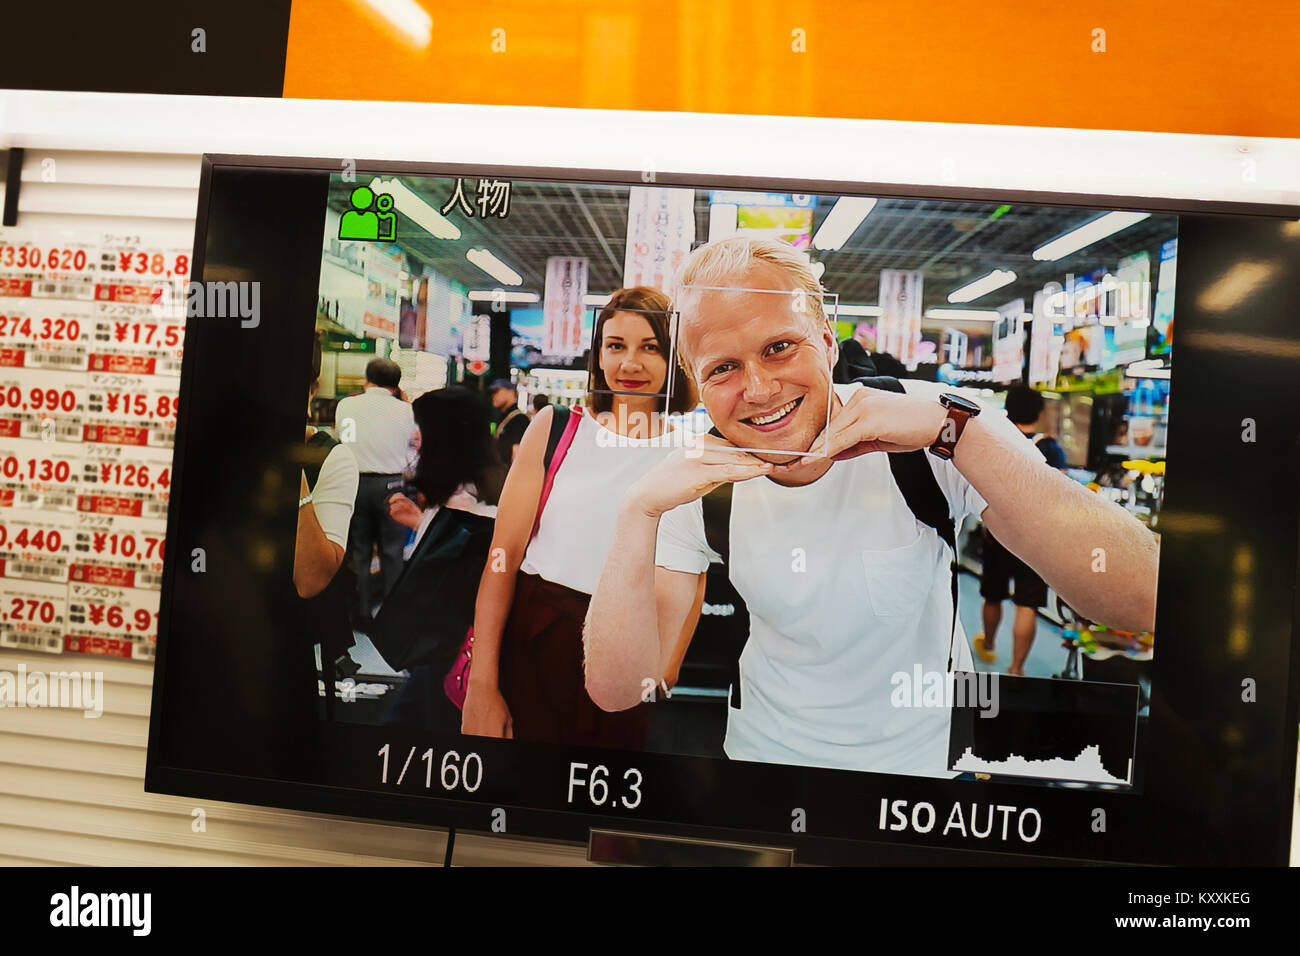 Close up of picture on smartphone showing smiling man and woman looking at camera. Stock Photo